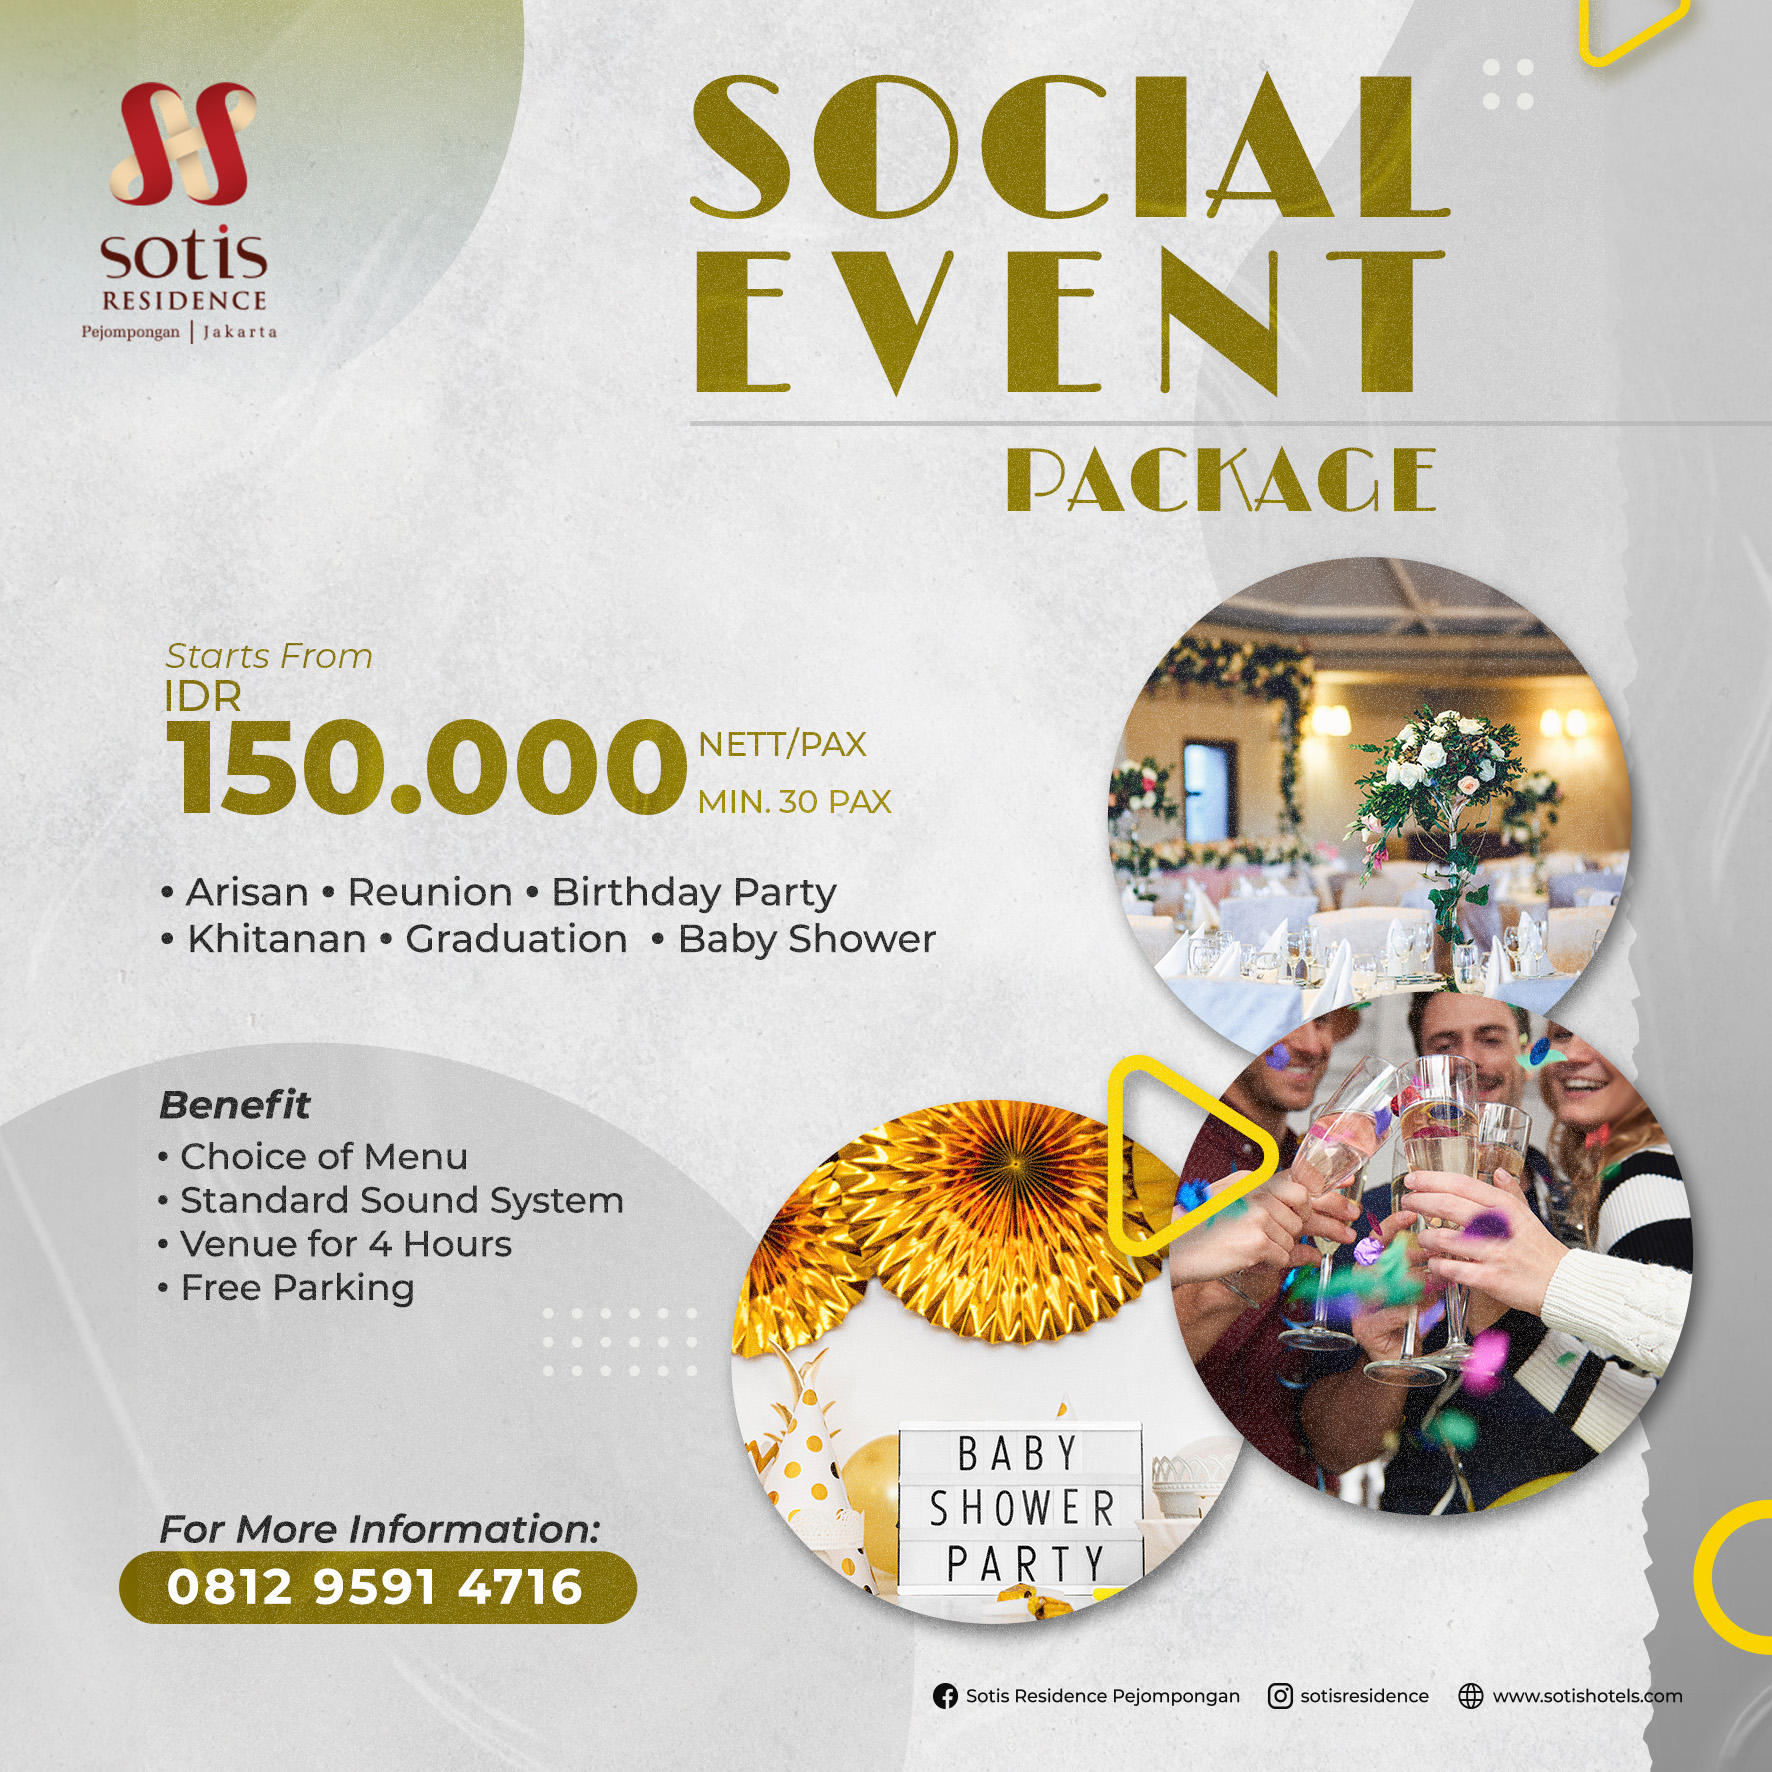 Social Event Package